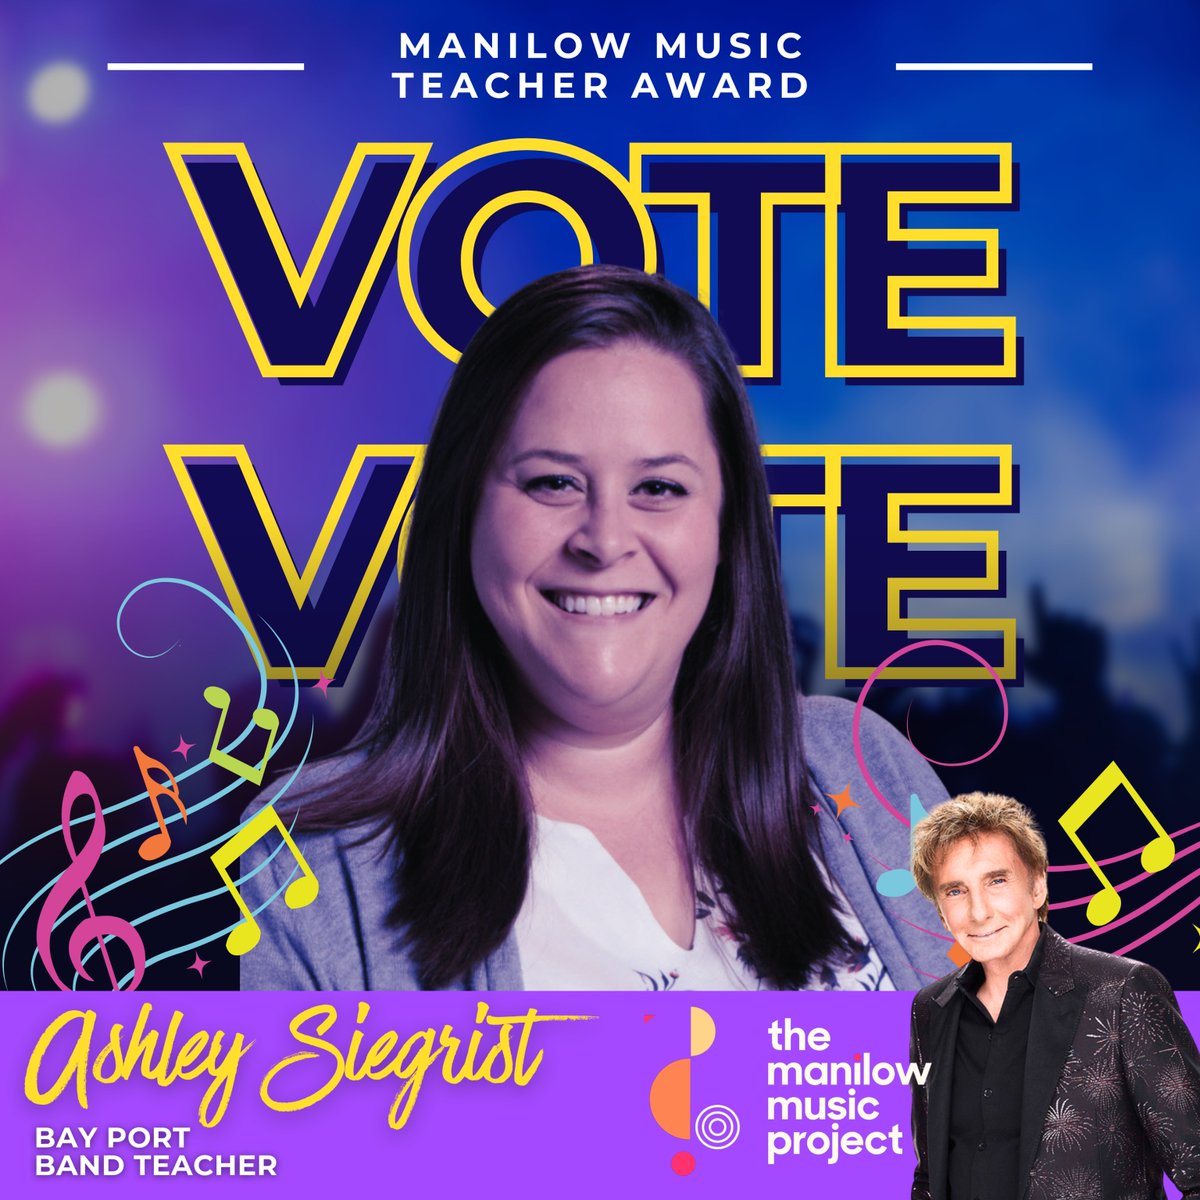 Drumroll please… @bayporths Band Teacher Ashley Siegrist is nominated for the Manilow Music Teacher Award! 🤩 The winner gets $5,000 in cash & a $5,000 credit that can be used to buy instruments for @BayPortBand. Vote daily until June 15! ow.ly/ijll50Rr7H2 Please share!